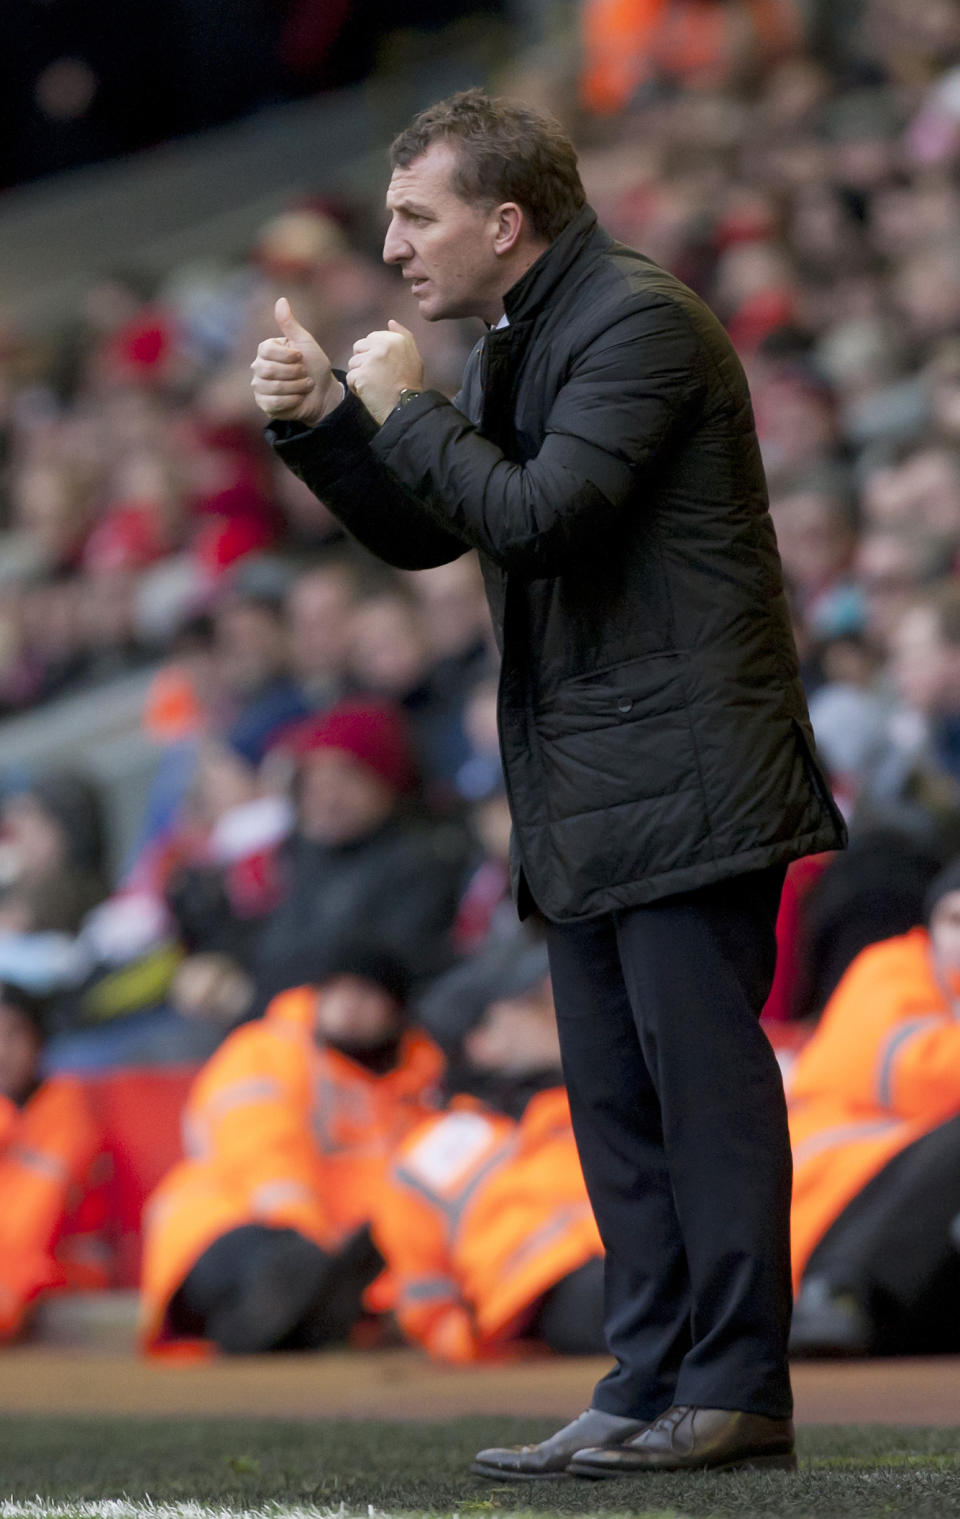 Liverpool's manager Brendan Rodgers gives a thumbs-up signal to his players as he watches his team's English Premier League soccer match against Arsenal at Anfield Stadium, Liverpool, England, Saturday Feb. 8, 2014. (AP Photo/Jon Super)